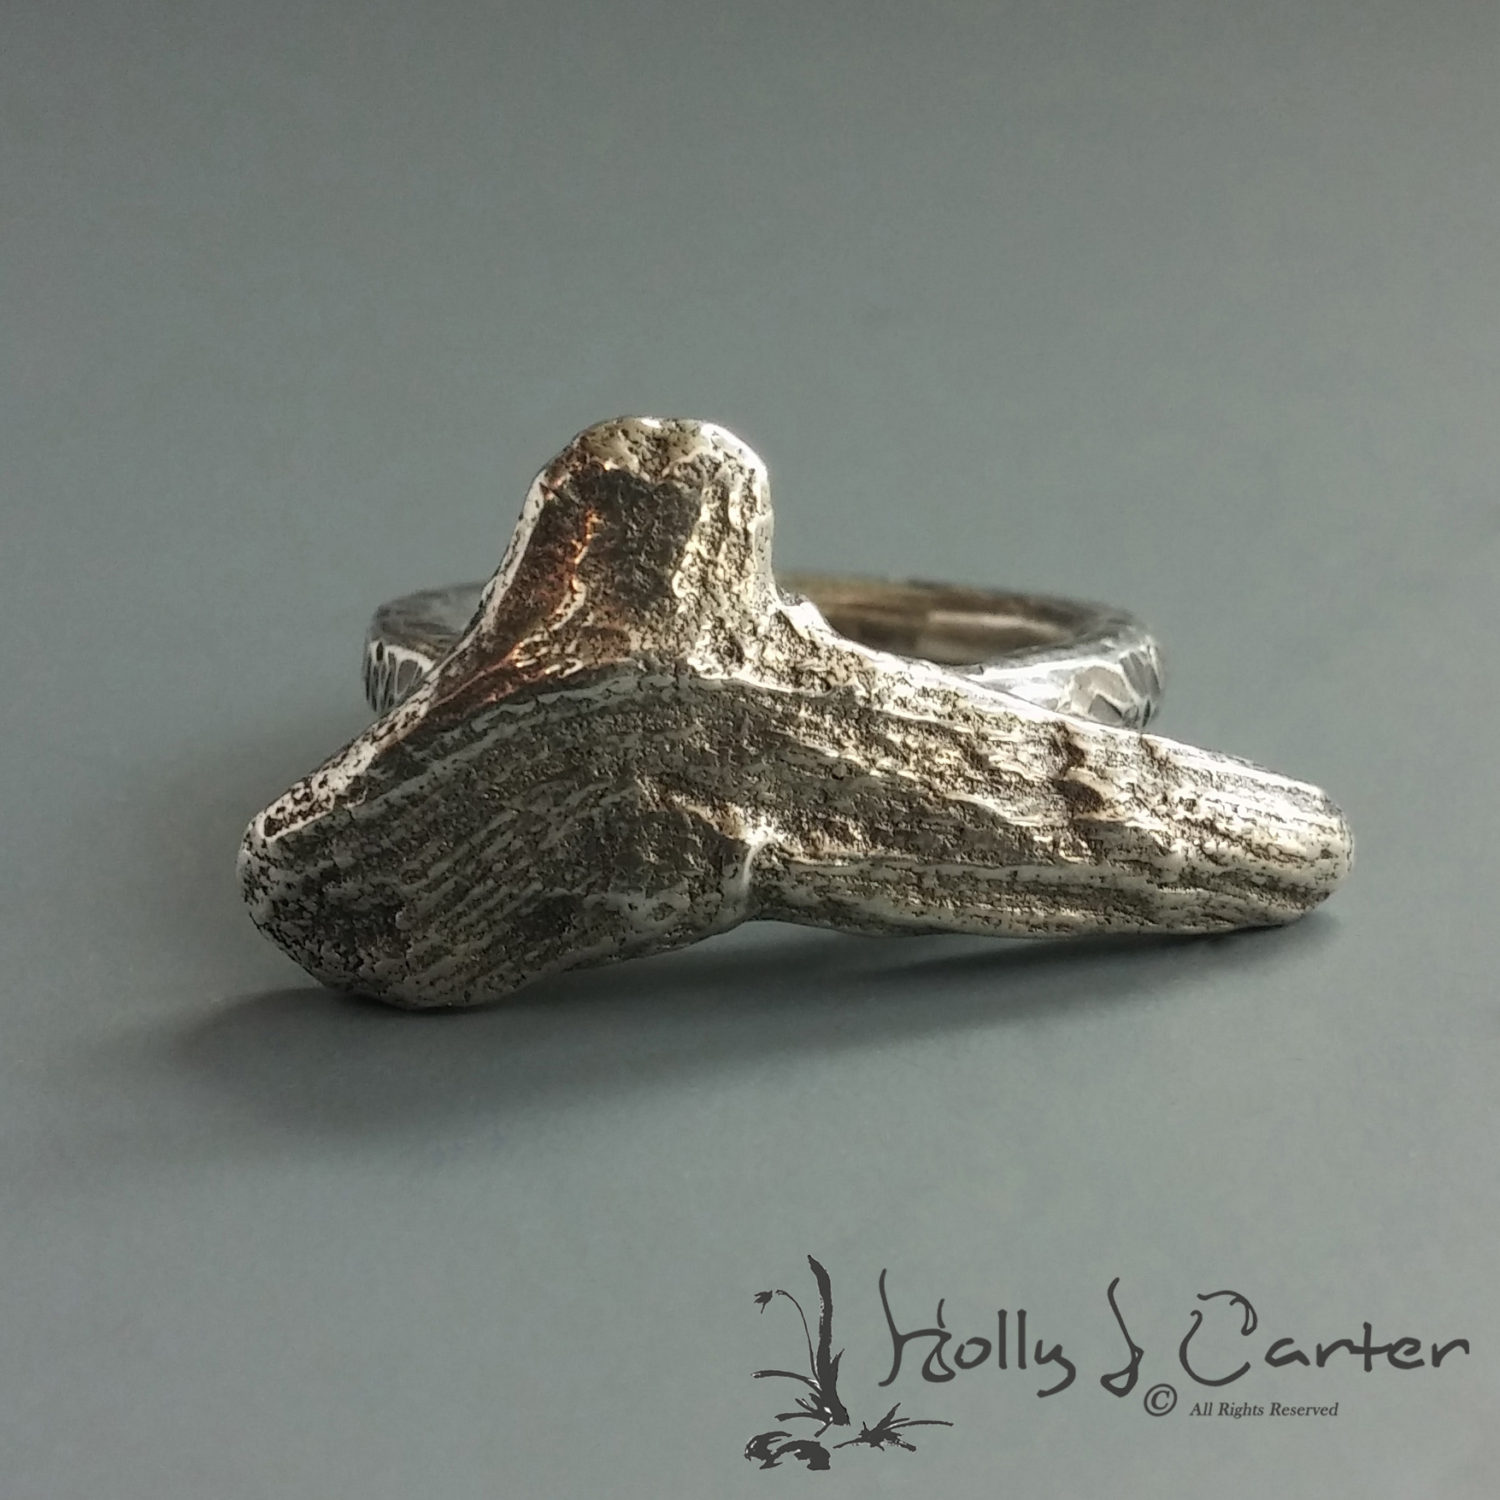 The Beachwood Sterling Silver Ring by Holly J Carter